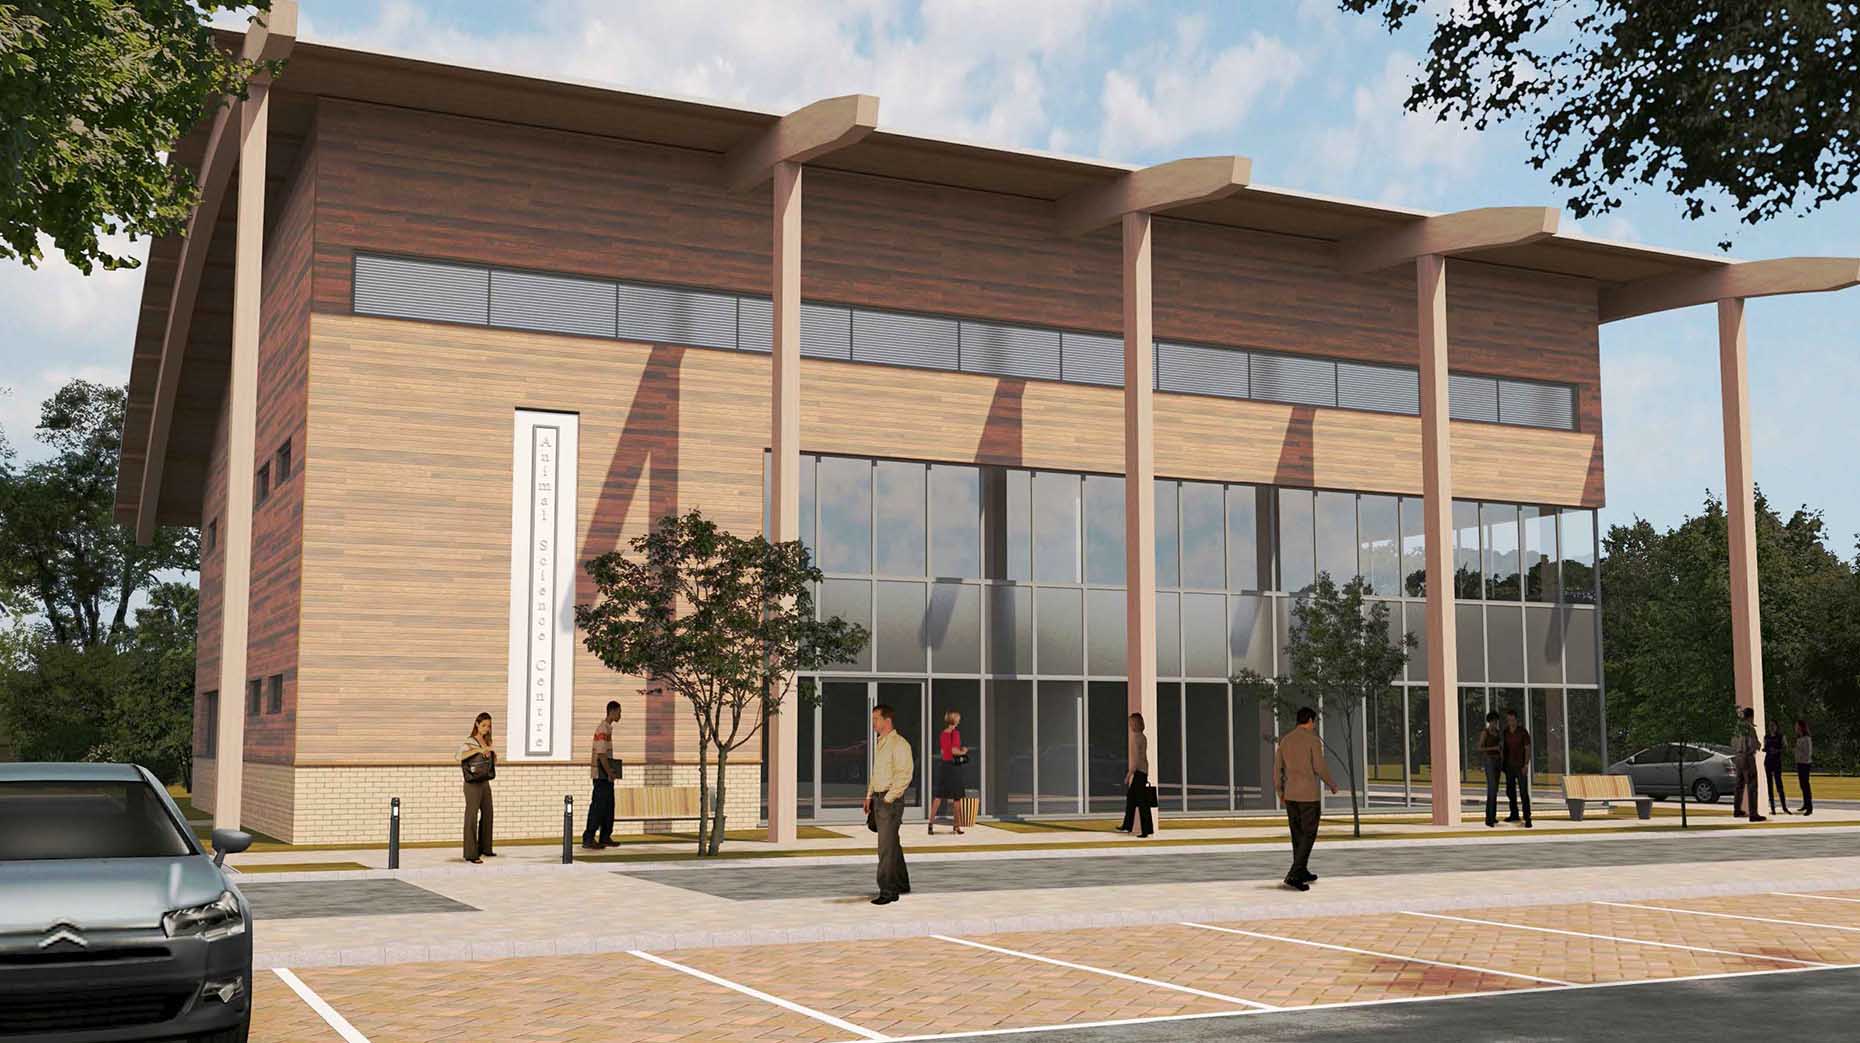 The proposed Animal Science Centre. Image: CAD Associates